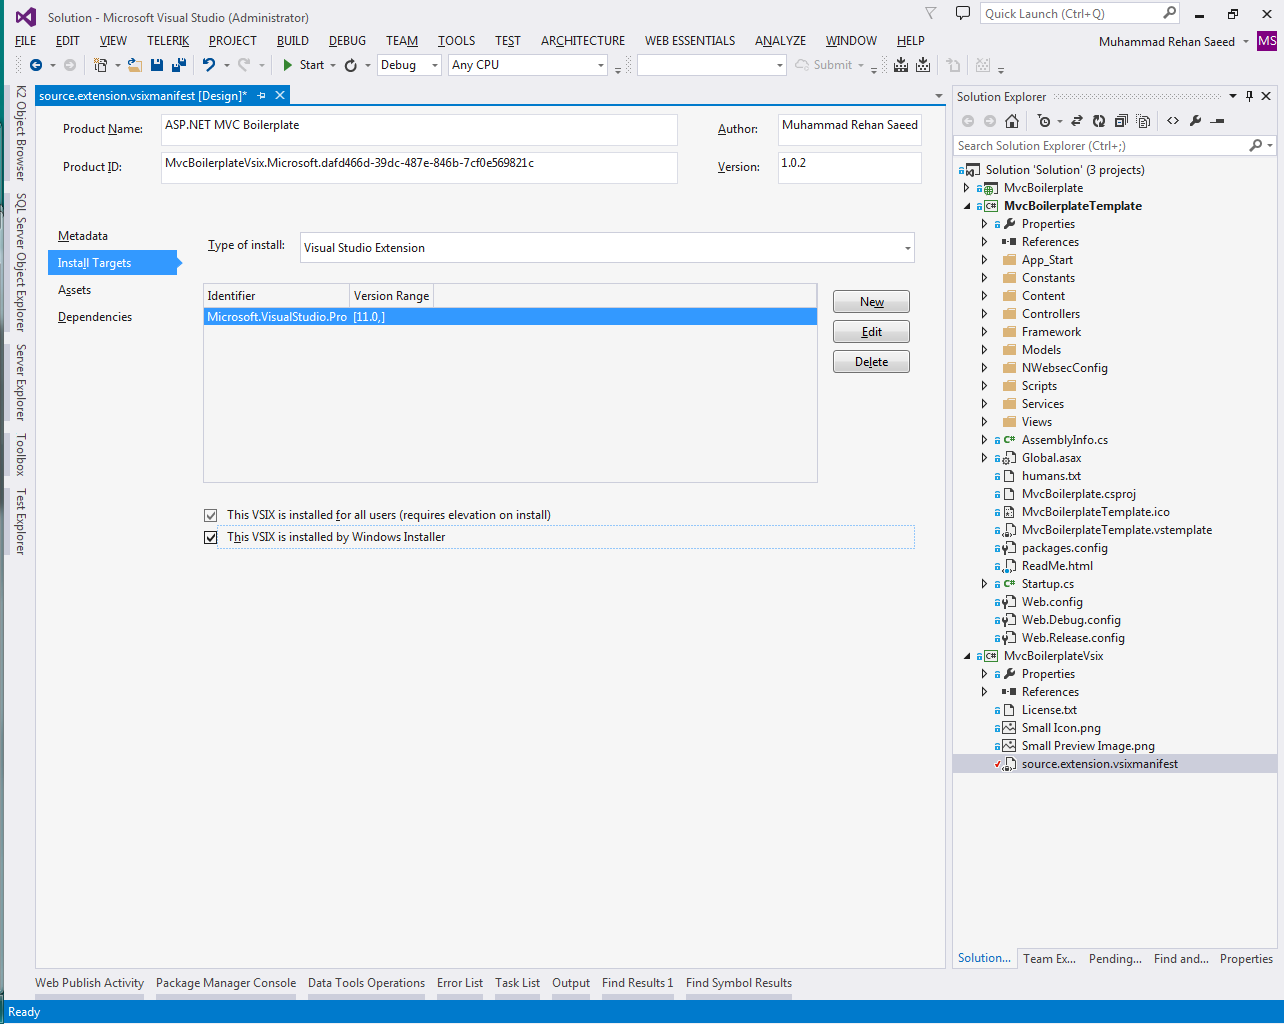 The installation targets or versions of Visual Studio your VSIX extension will install to.